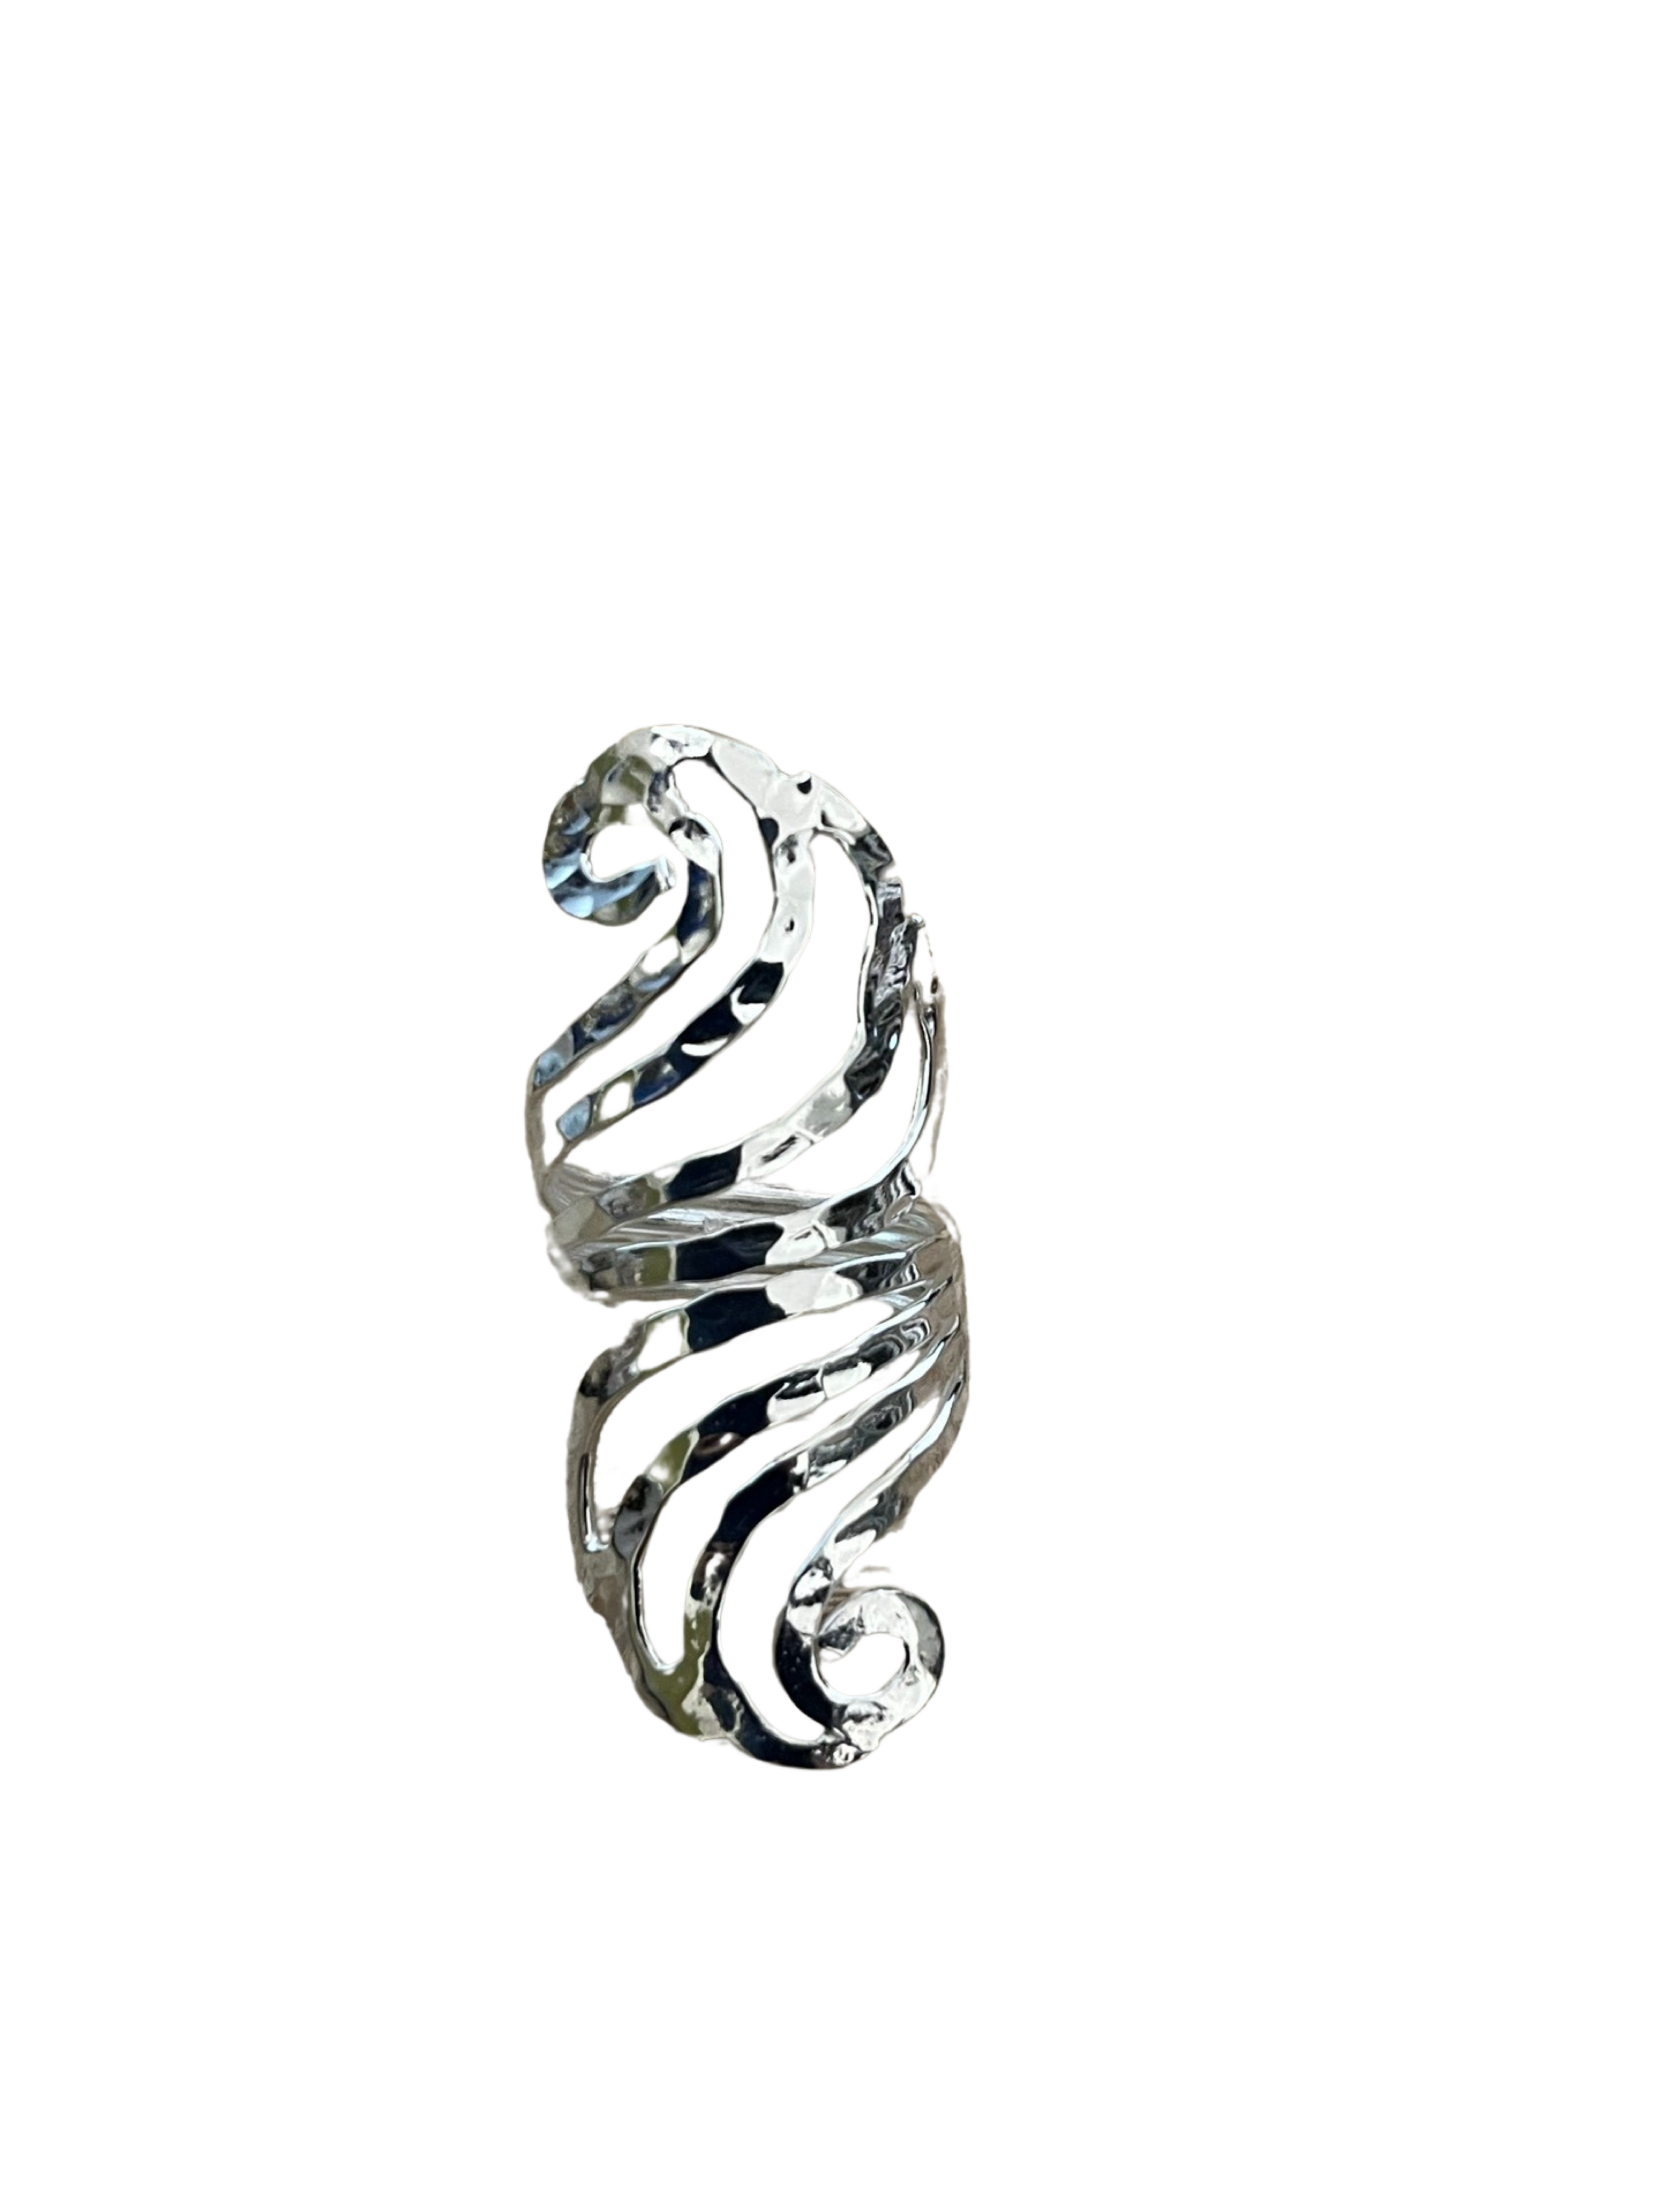 Mex Silver Hammered Ring Astd